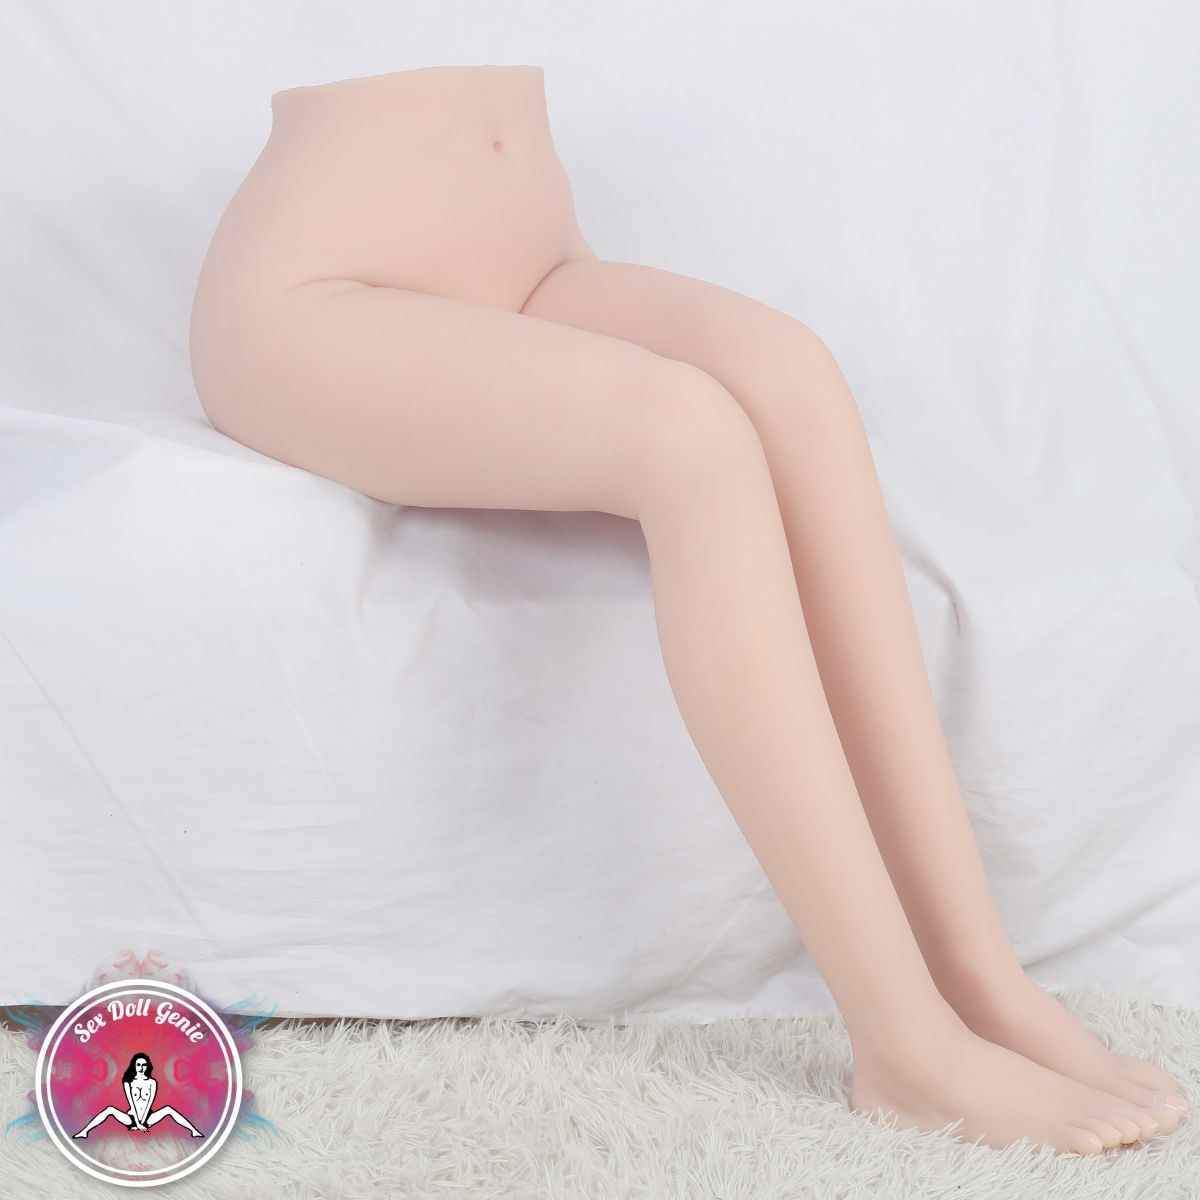 Sex Doll - Sex Doll Lower Body (Version Skinny) - Product Image